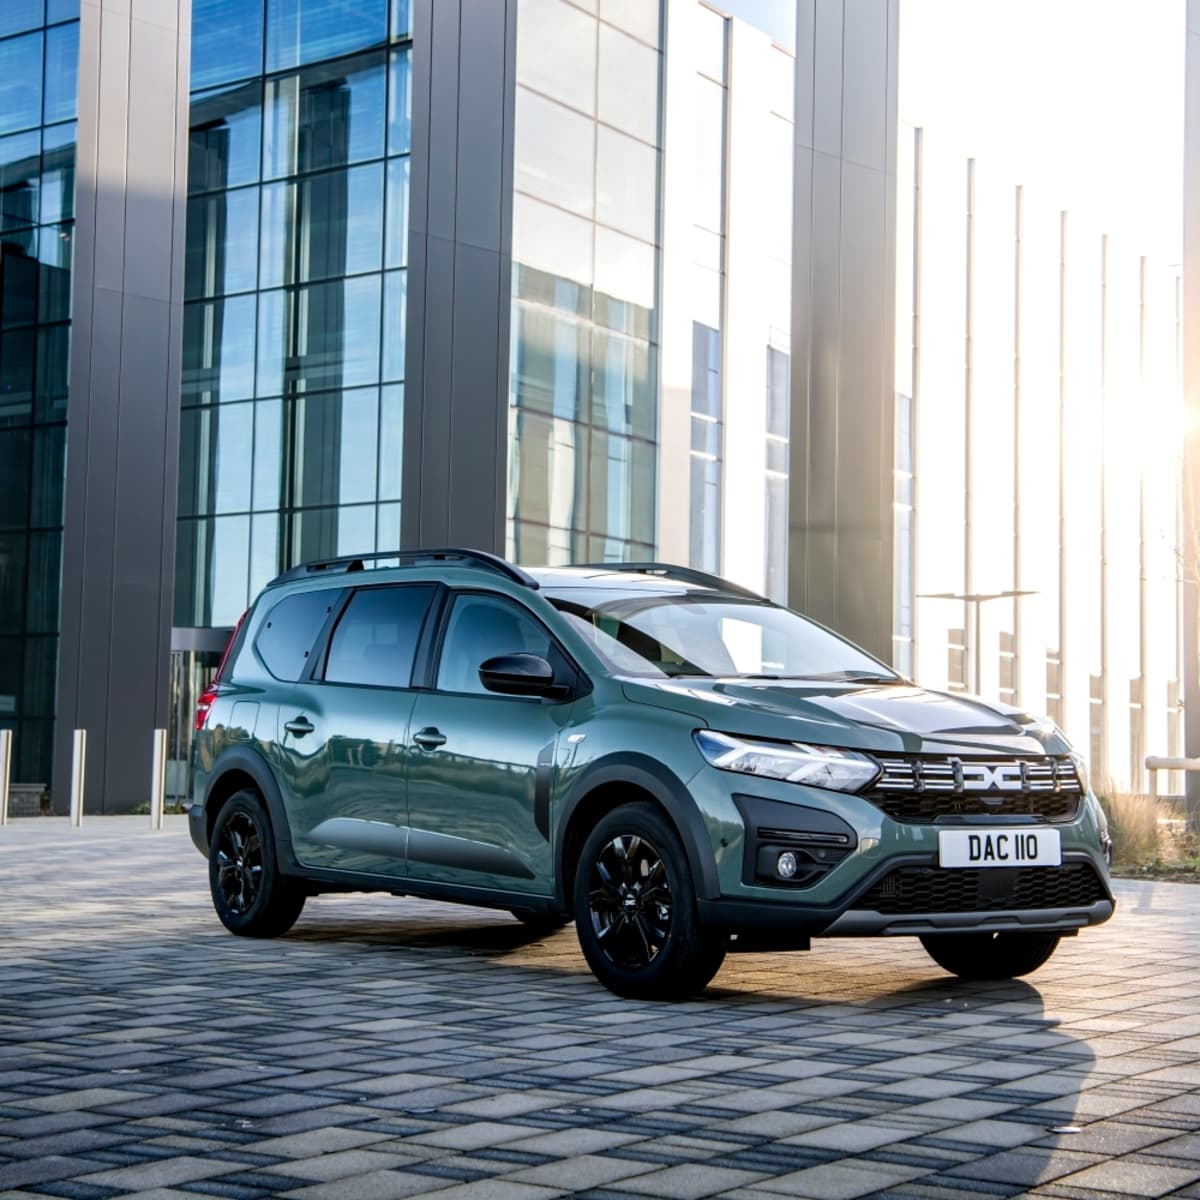 Dacia Jogger offers genuine 7-seater practicality at an unparalleled price.  Budget family MPVs don't get better than this. - EuropeanLife Media